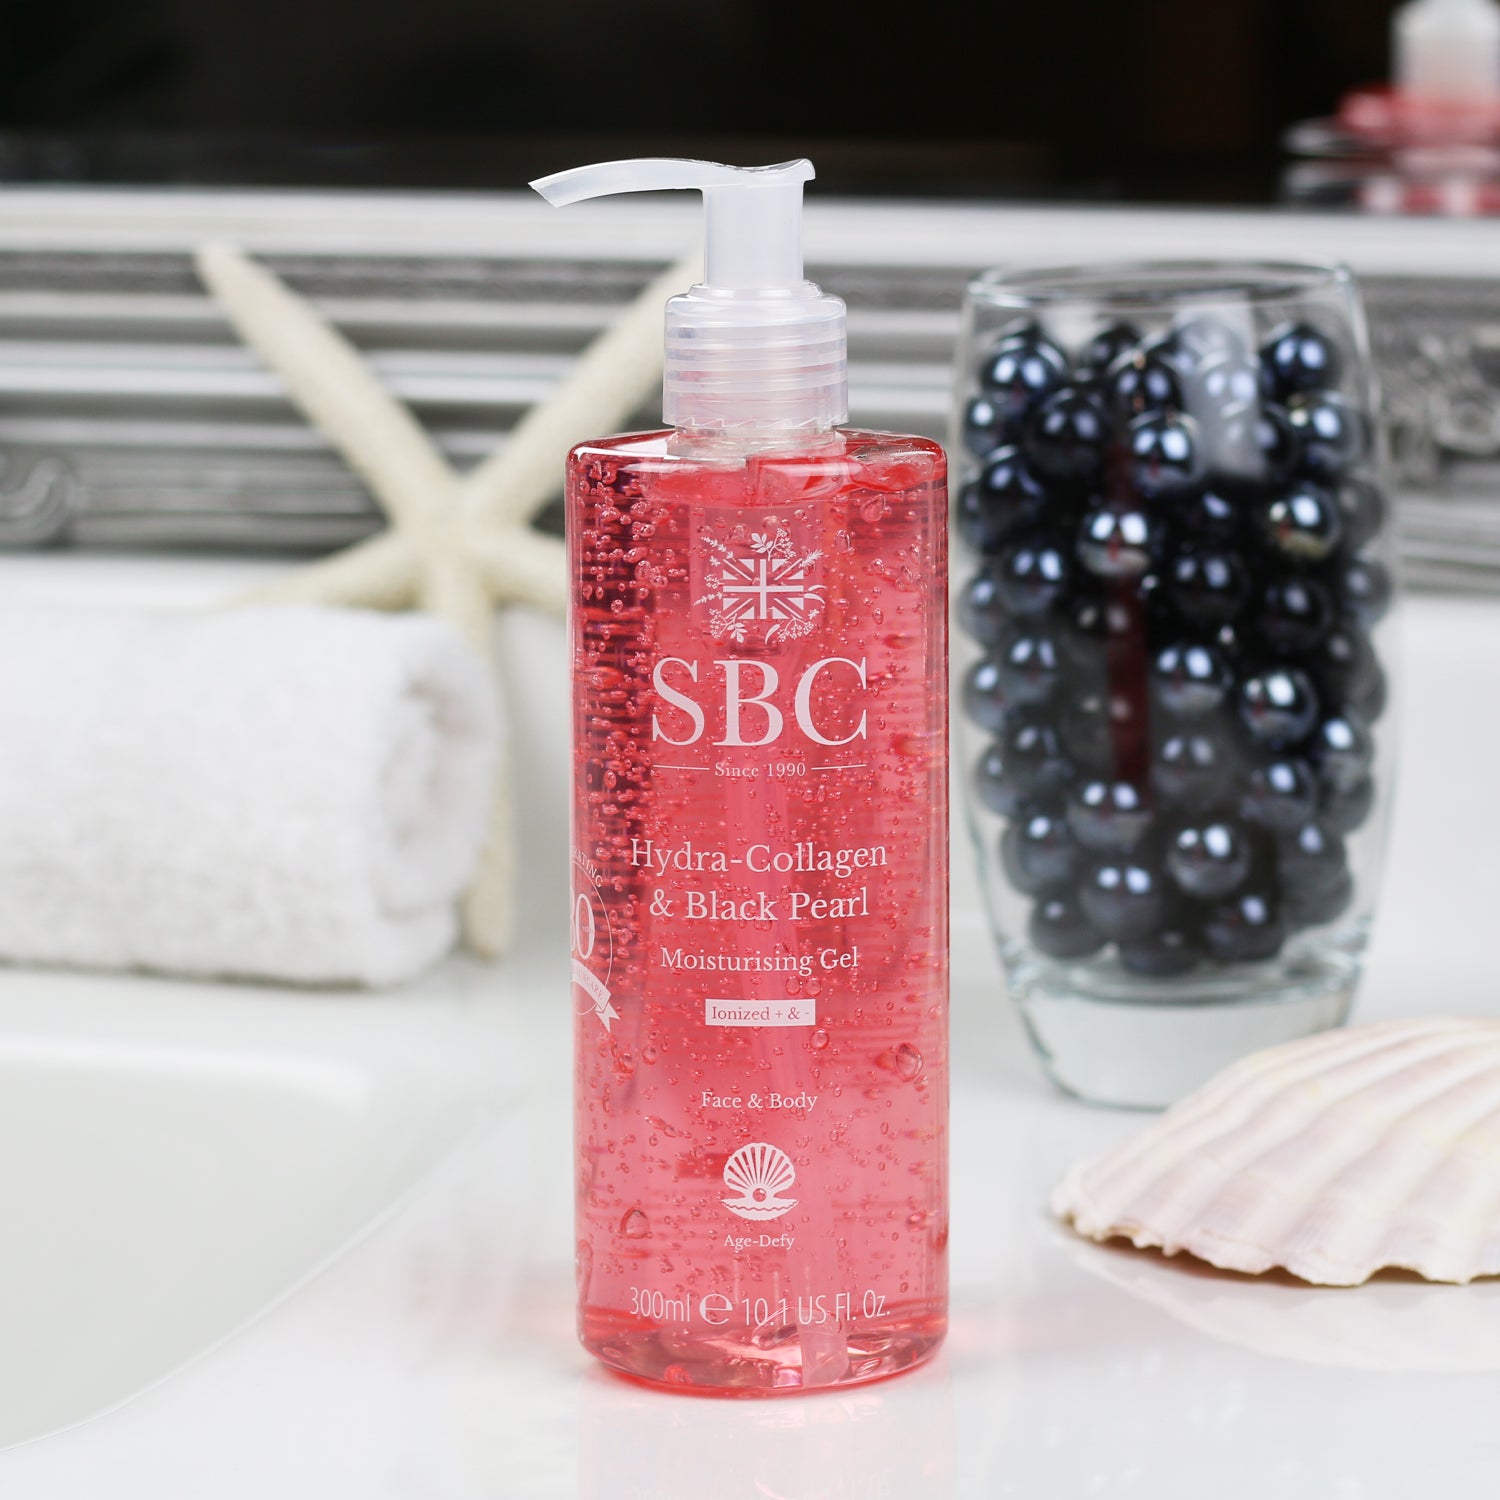 300ml of SBC Skincare's Hydra-Collagen & Black Pearl Moisturising Gel on a bathroom sink with a glass of black pearls and a shell 